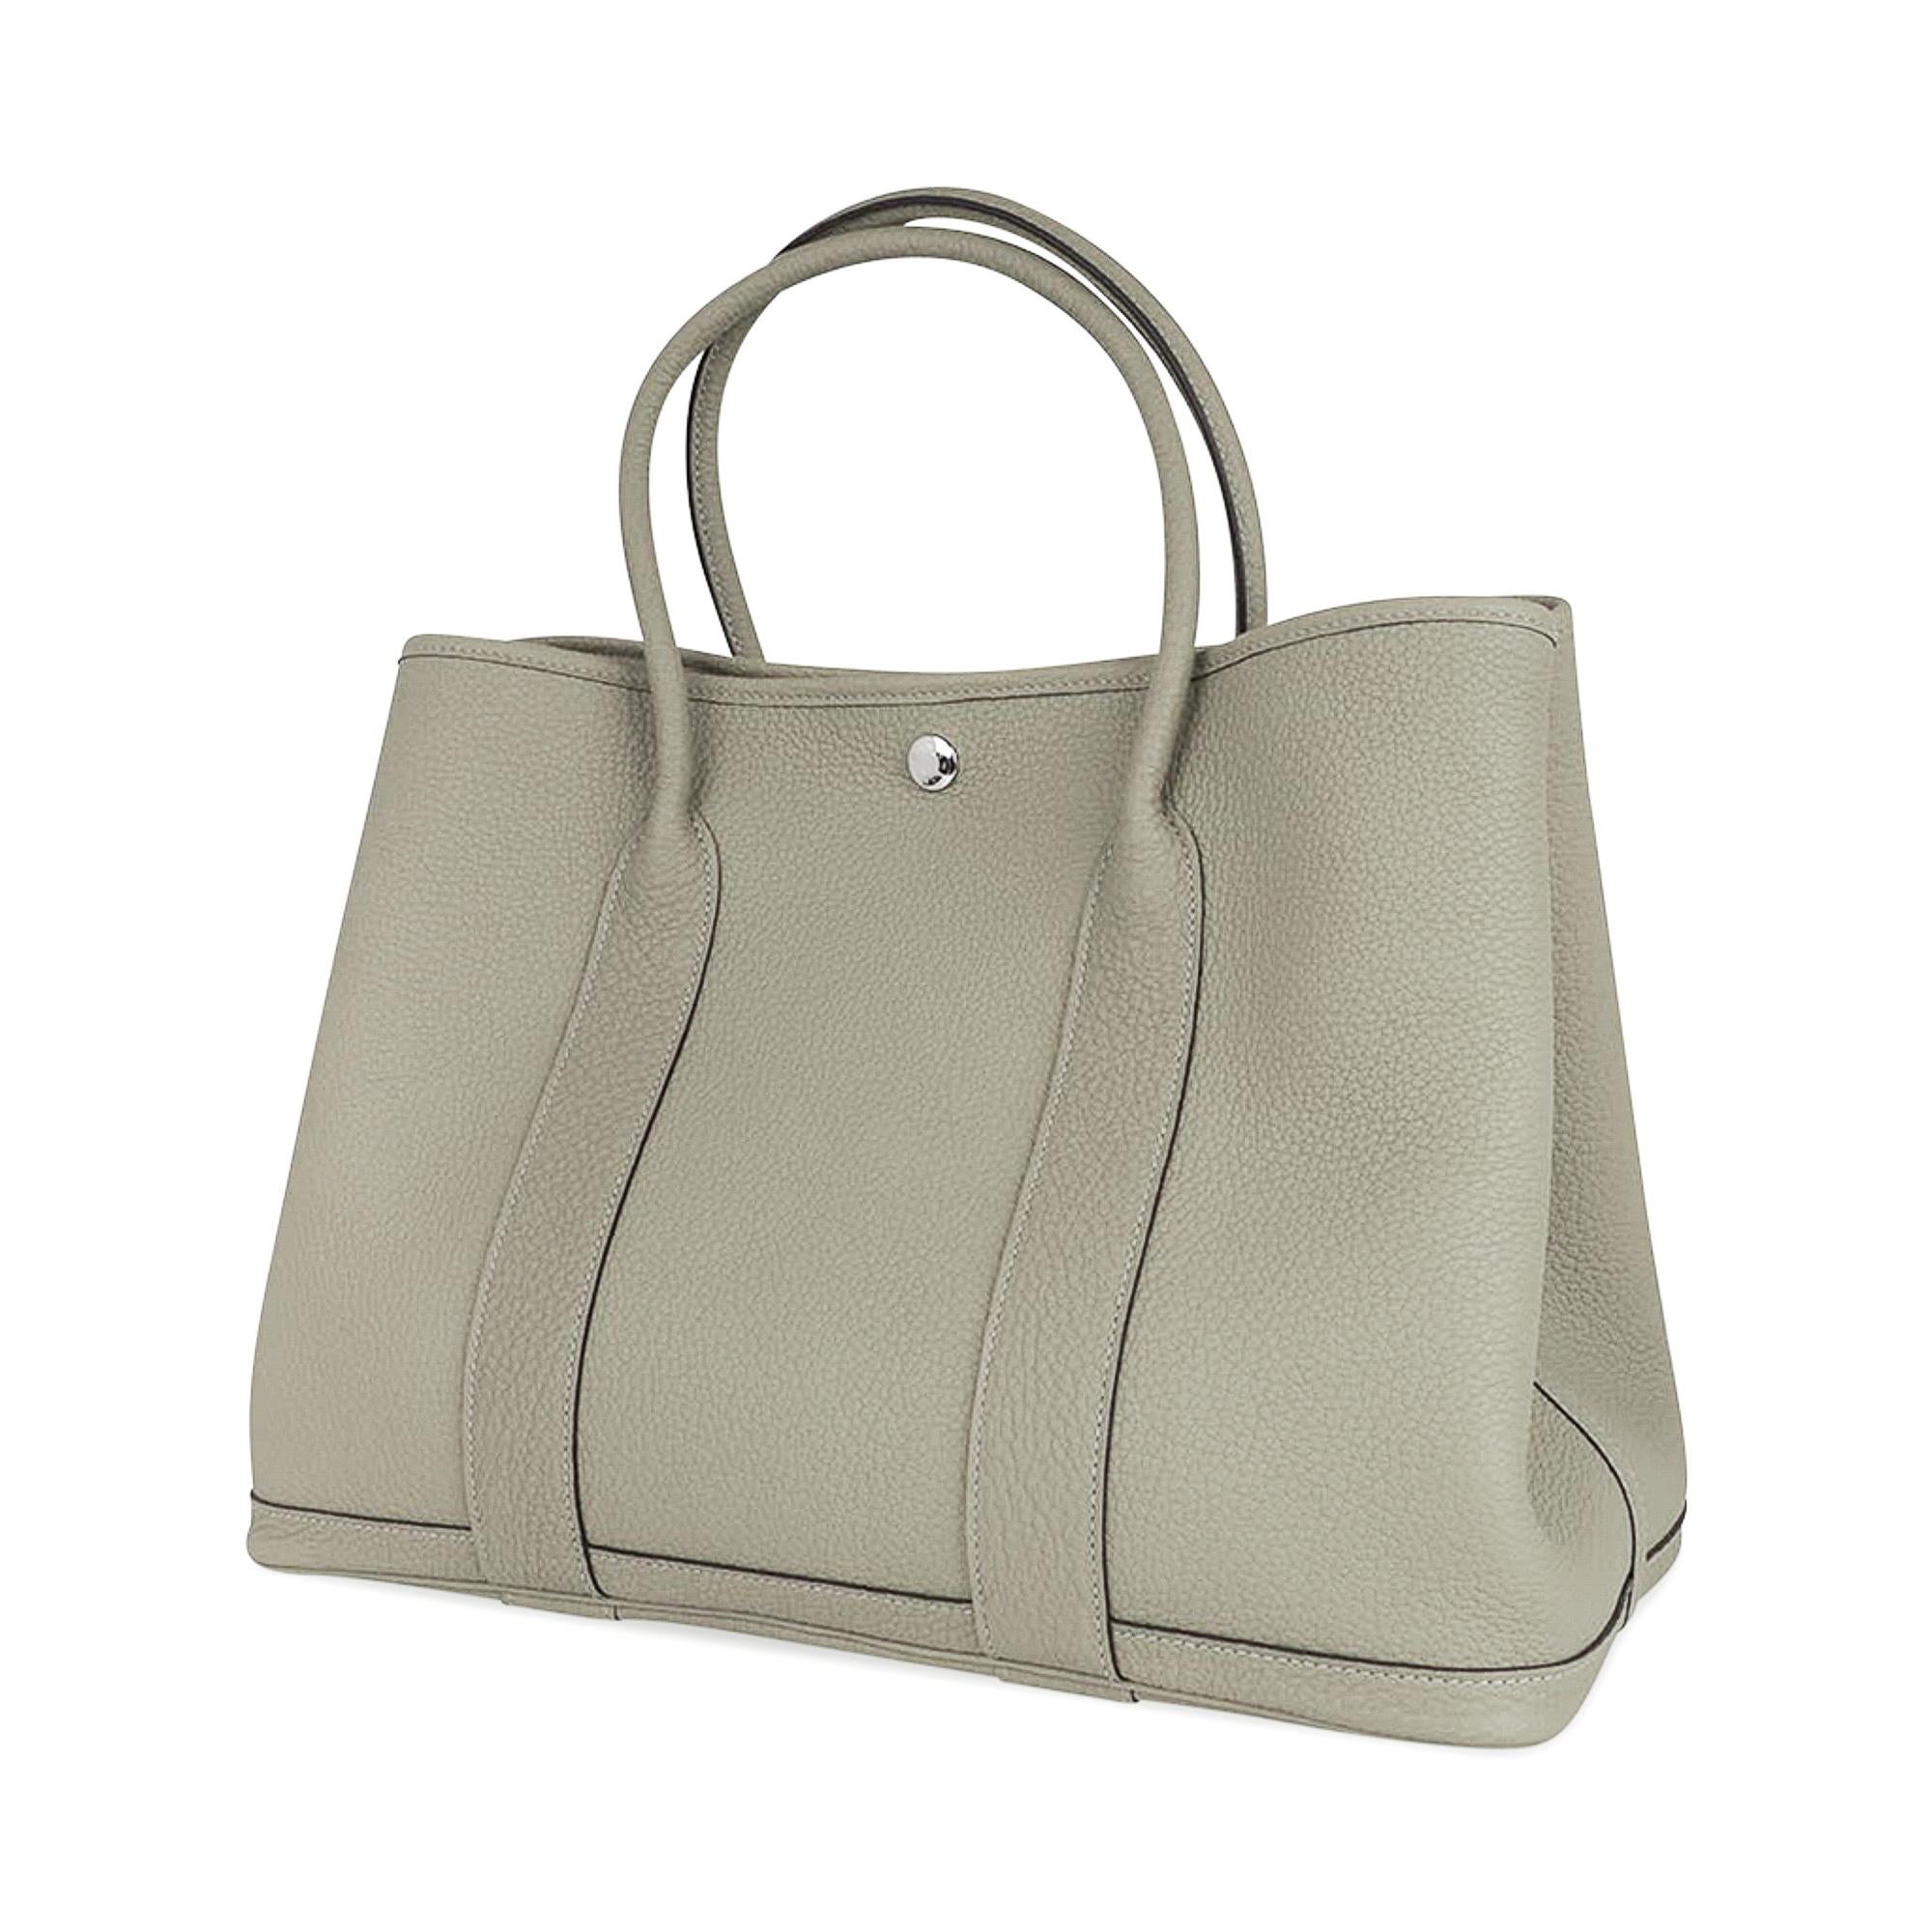 Mightychic offers an Hermes Garden Party 36 bag featured in Sage Negonda leather.
This beautiful shade of gray-green is neutral perfection, and
is the perfect about town tote.
Accentuated with palladium Clou de Selle.
Chevron canvas lining and